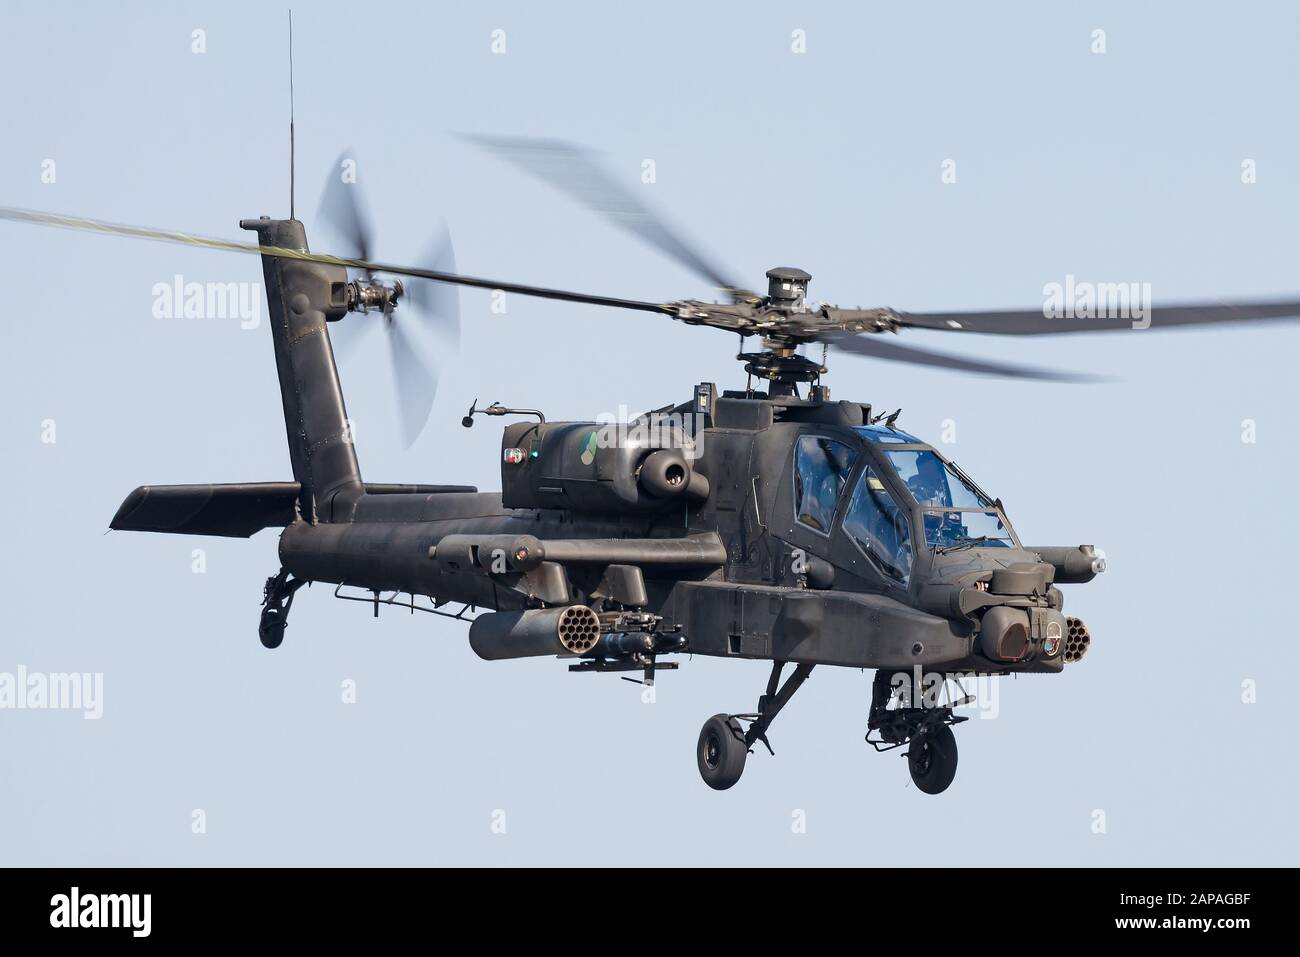 A Boeing AH-64 Apache attack helicopter of the 301 Squadron of the Royal Netherlands Air Force at the Gilze-Rijen Air Base. Stock Photo